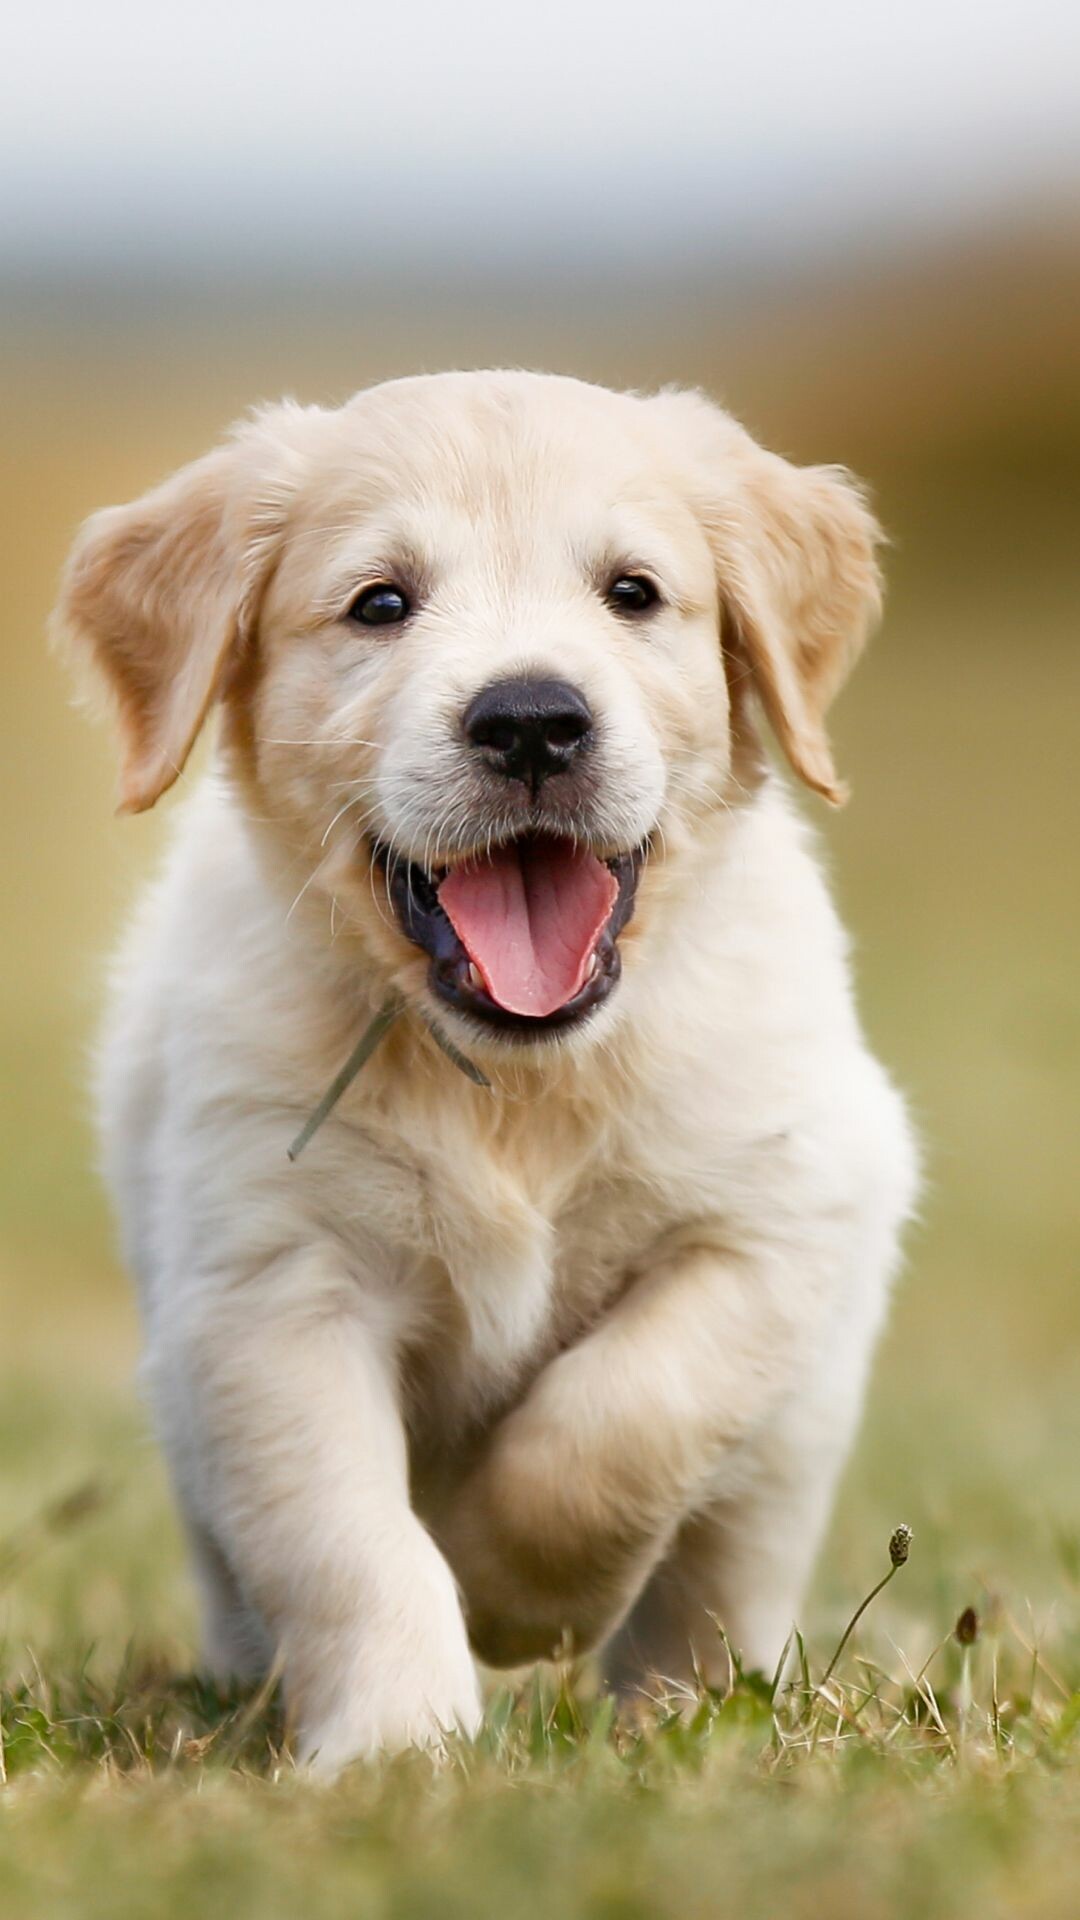 Golden Retriever puppies, Pure joy and happiness, Furry bundles of love, Heart-melting images, 1080x1920 Full HD Phone